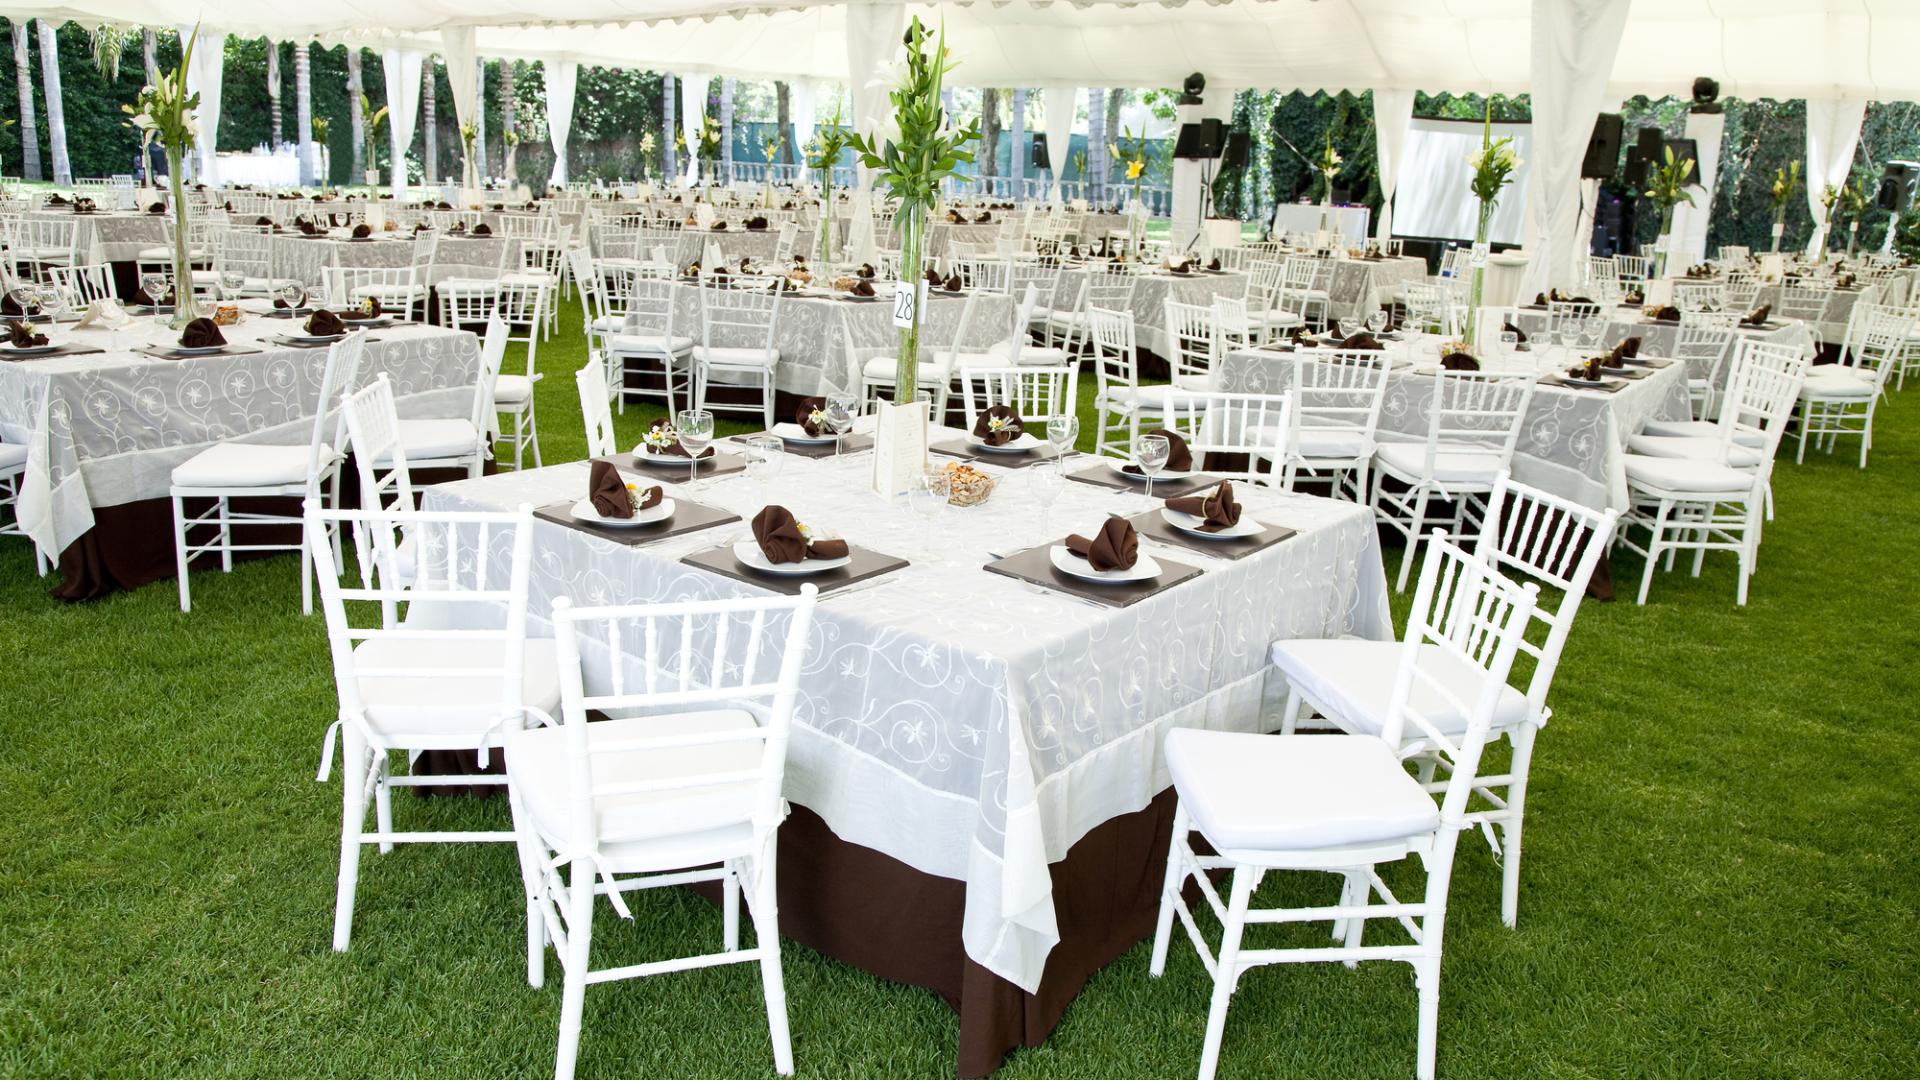 Small Wedding Reception Venues for Rent in Chicago, IL